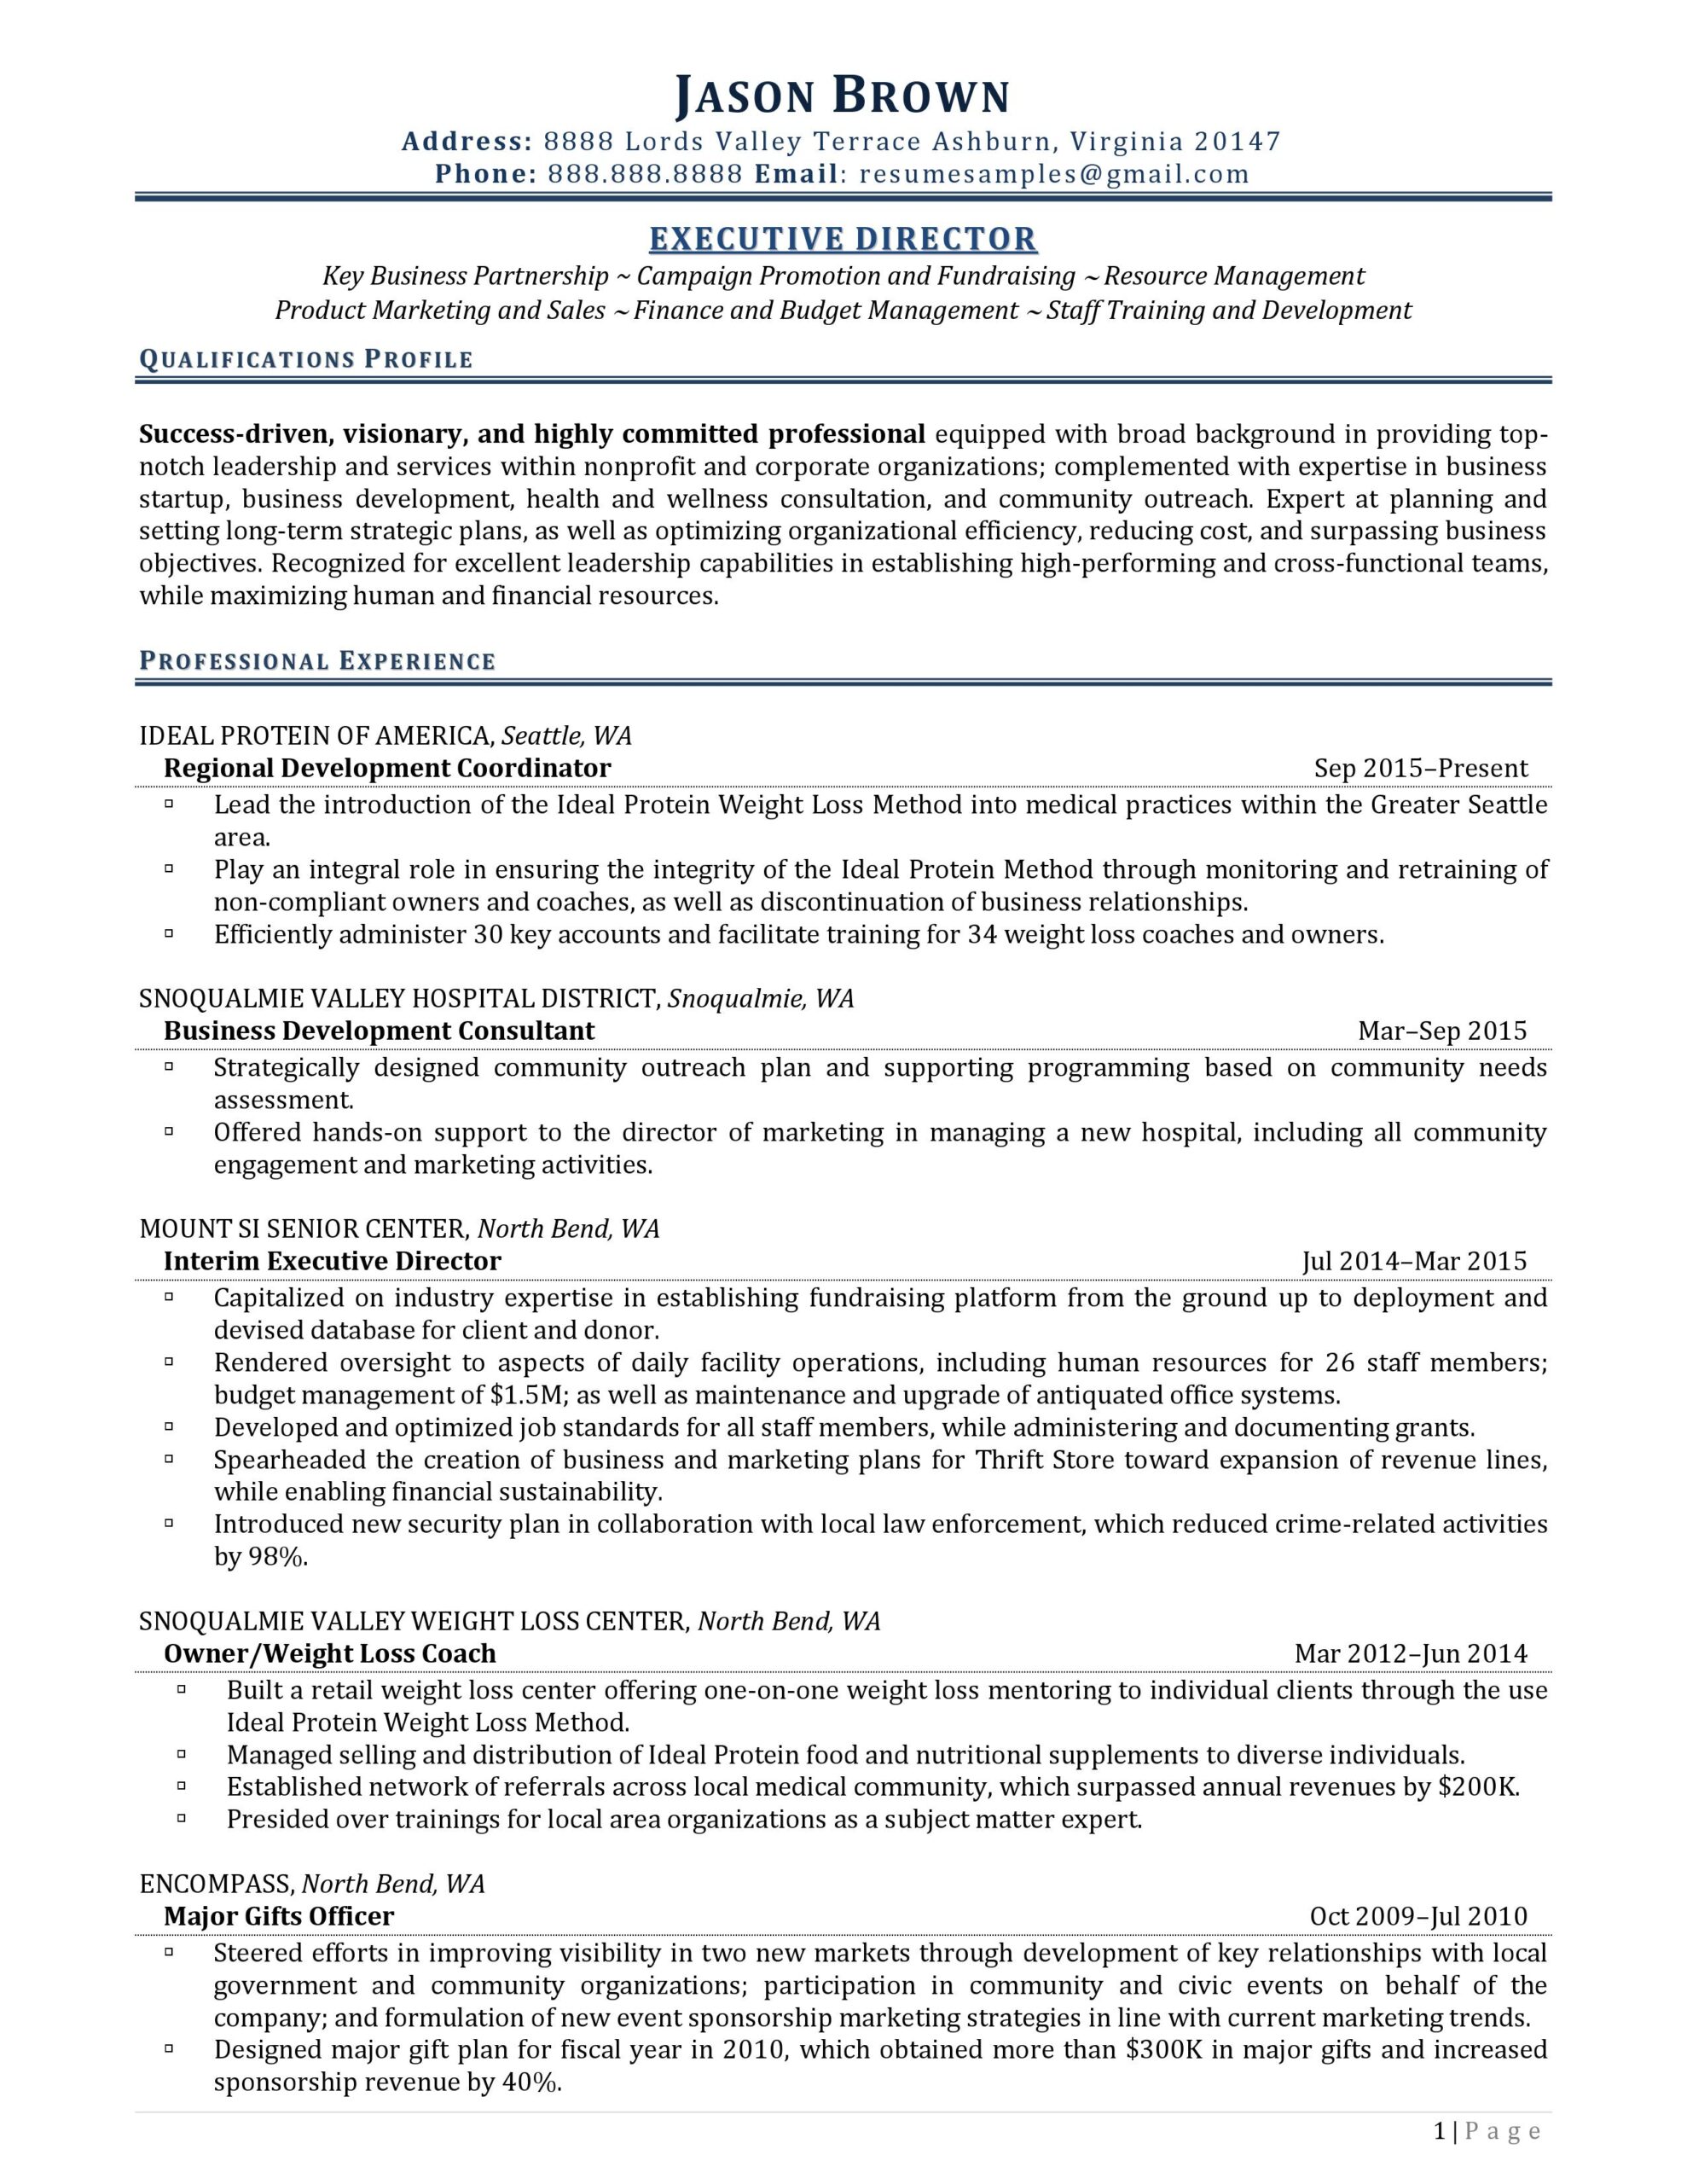 how to write resume for executive position